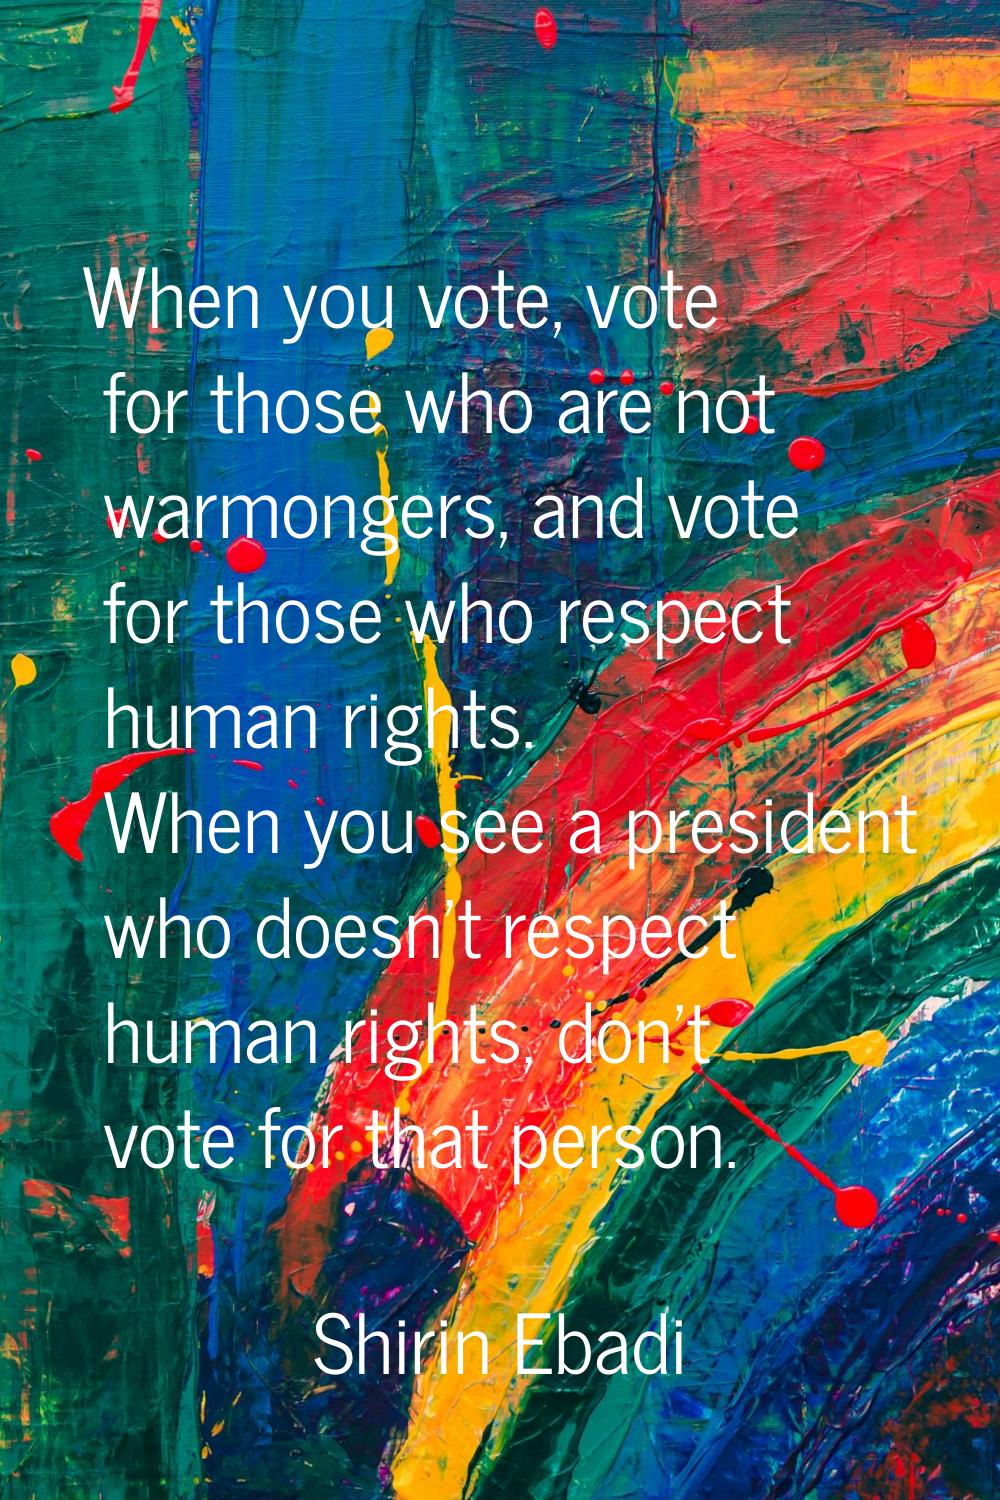 When you vote, vote for those who are not warmongers, and vote for those who respect human rights. 